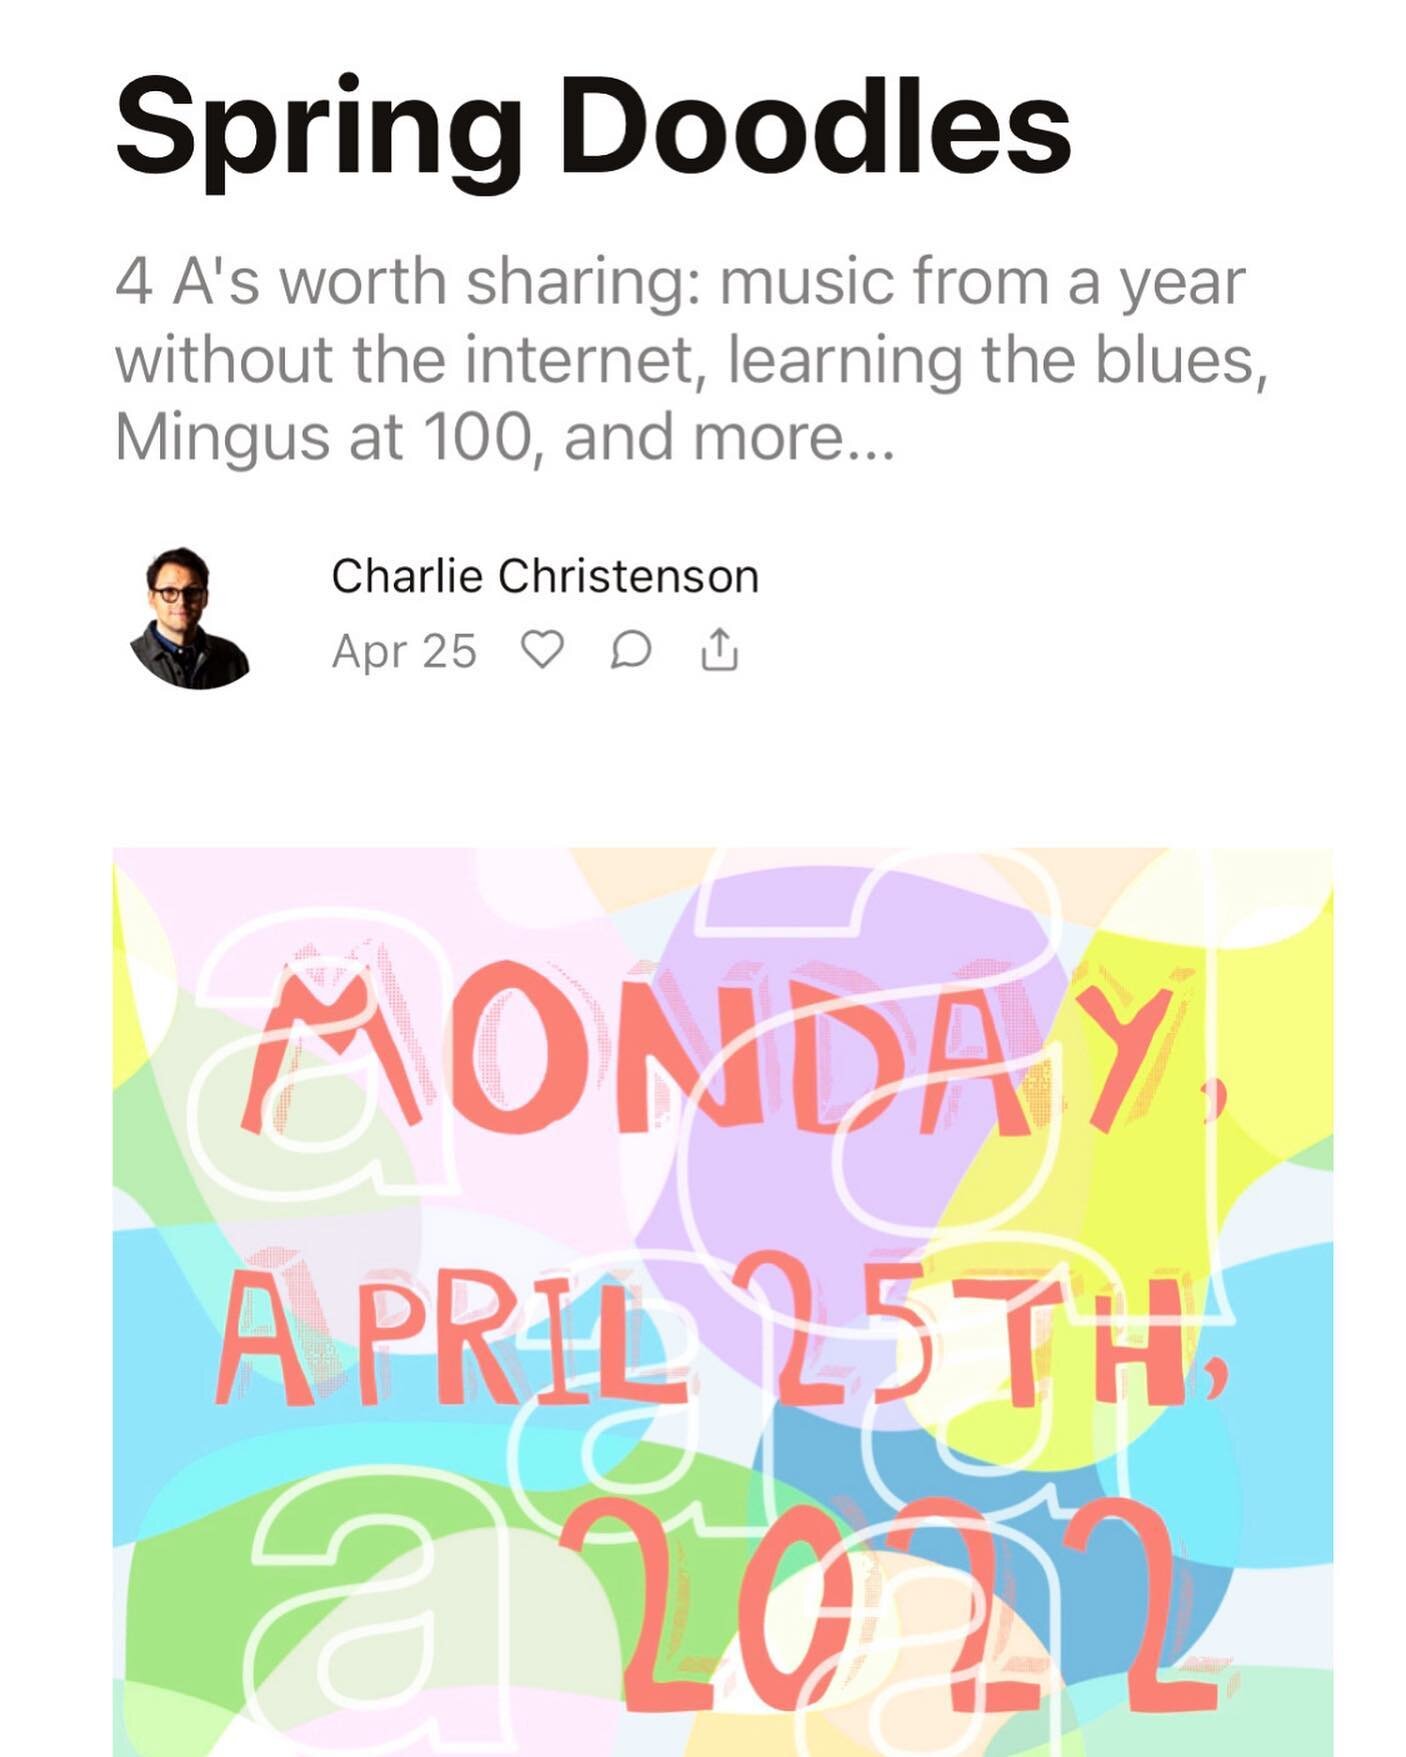 4 A's worth sharing this week: music from a year without the internet, learning the blues, Mingus at 100, and more...

New post on our substack!